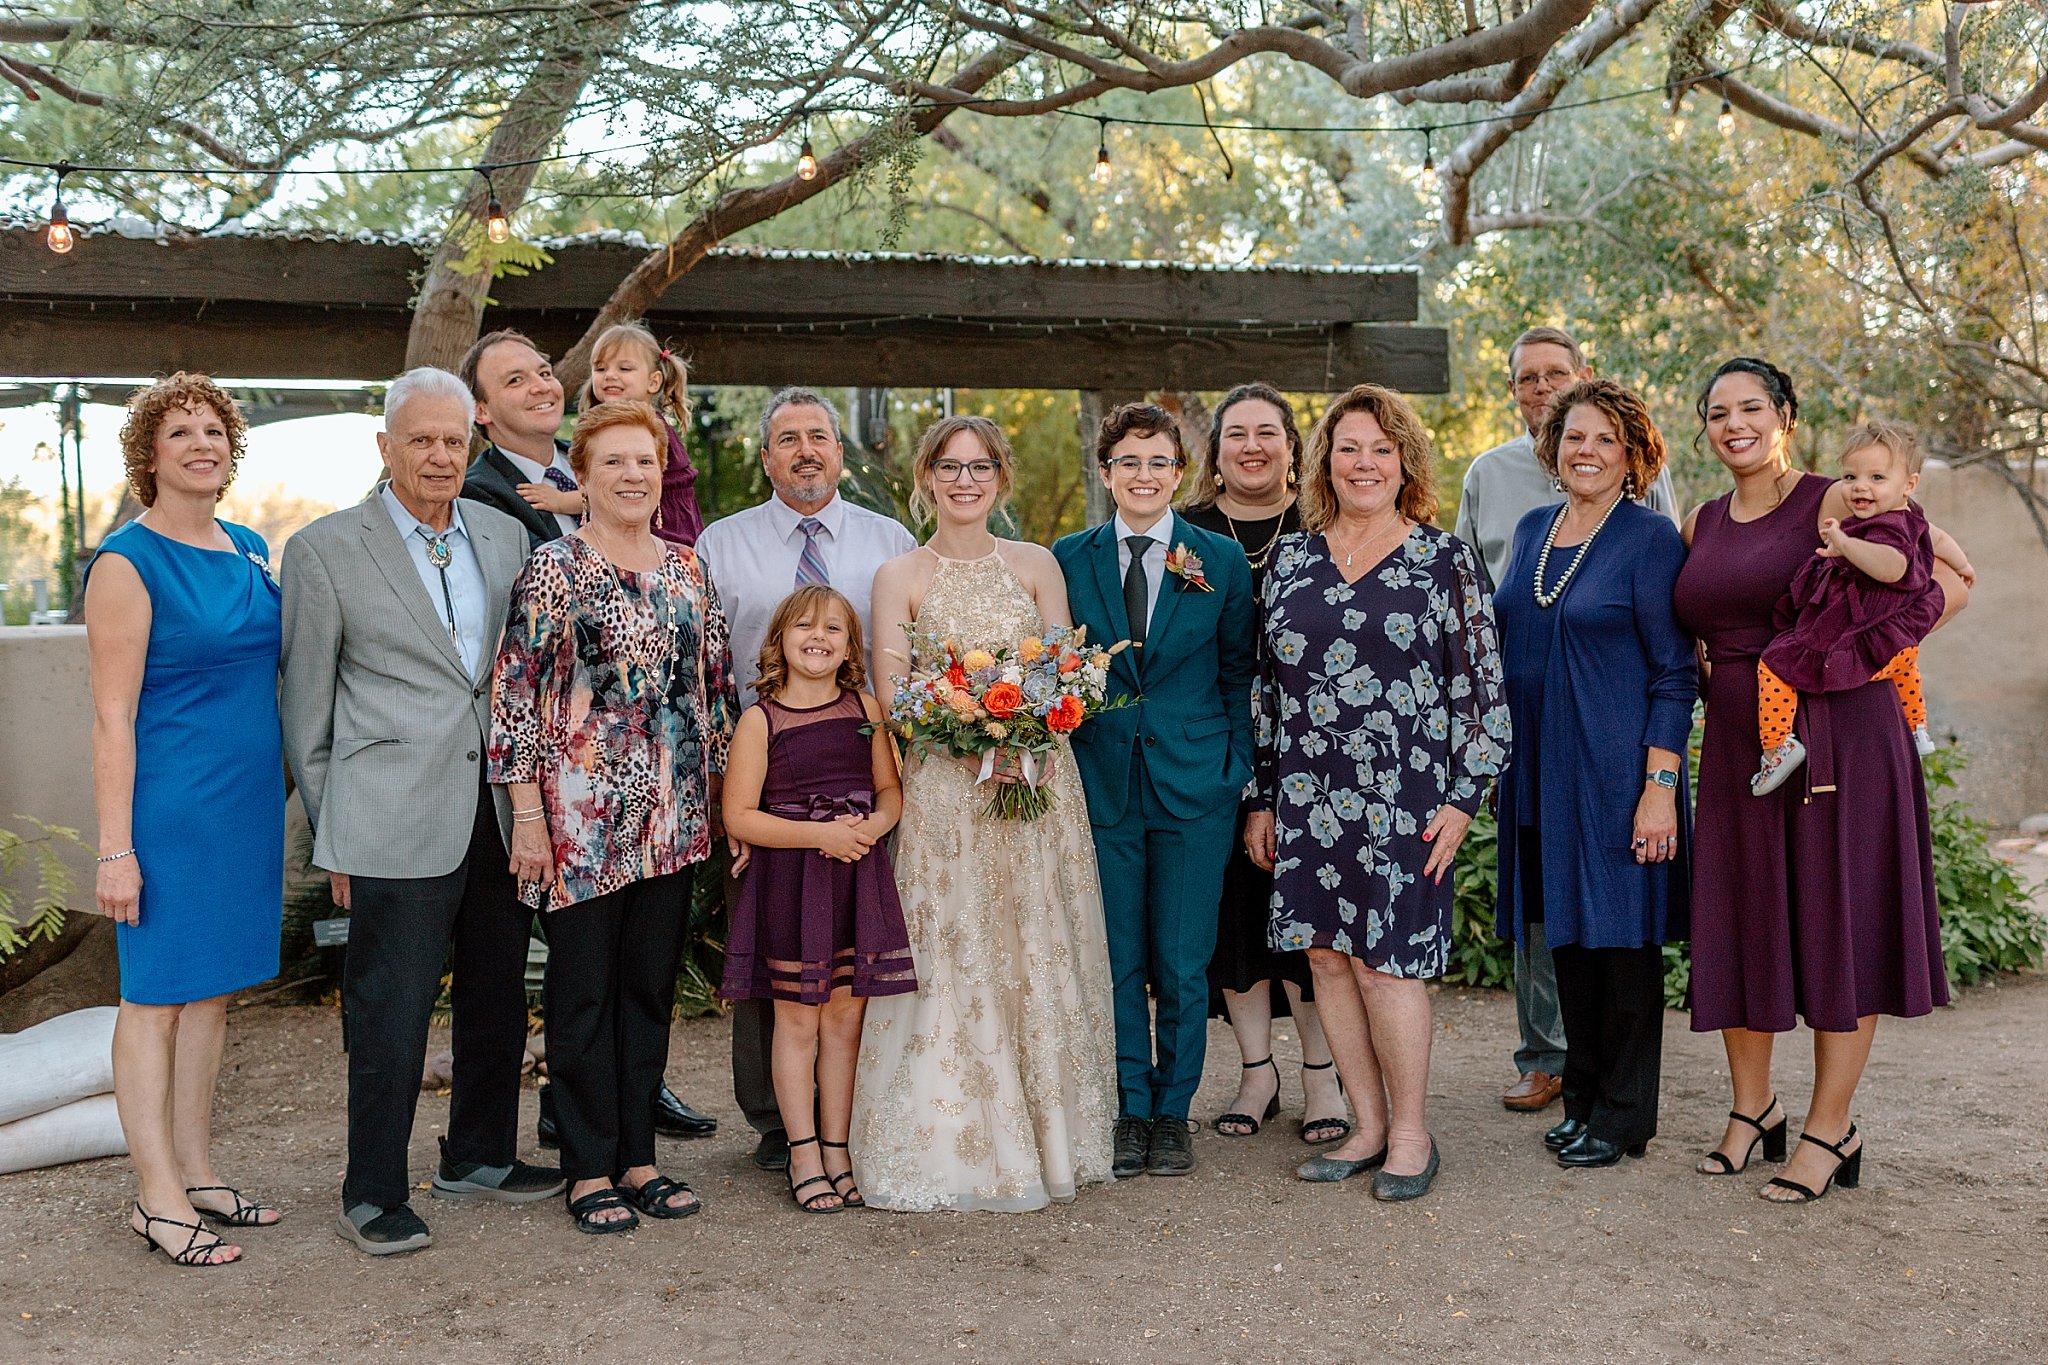  family stands together at Tucson botanical gardens ceremony 